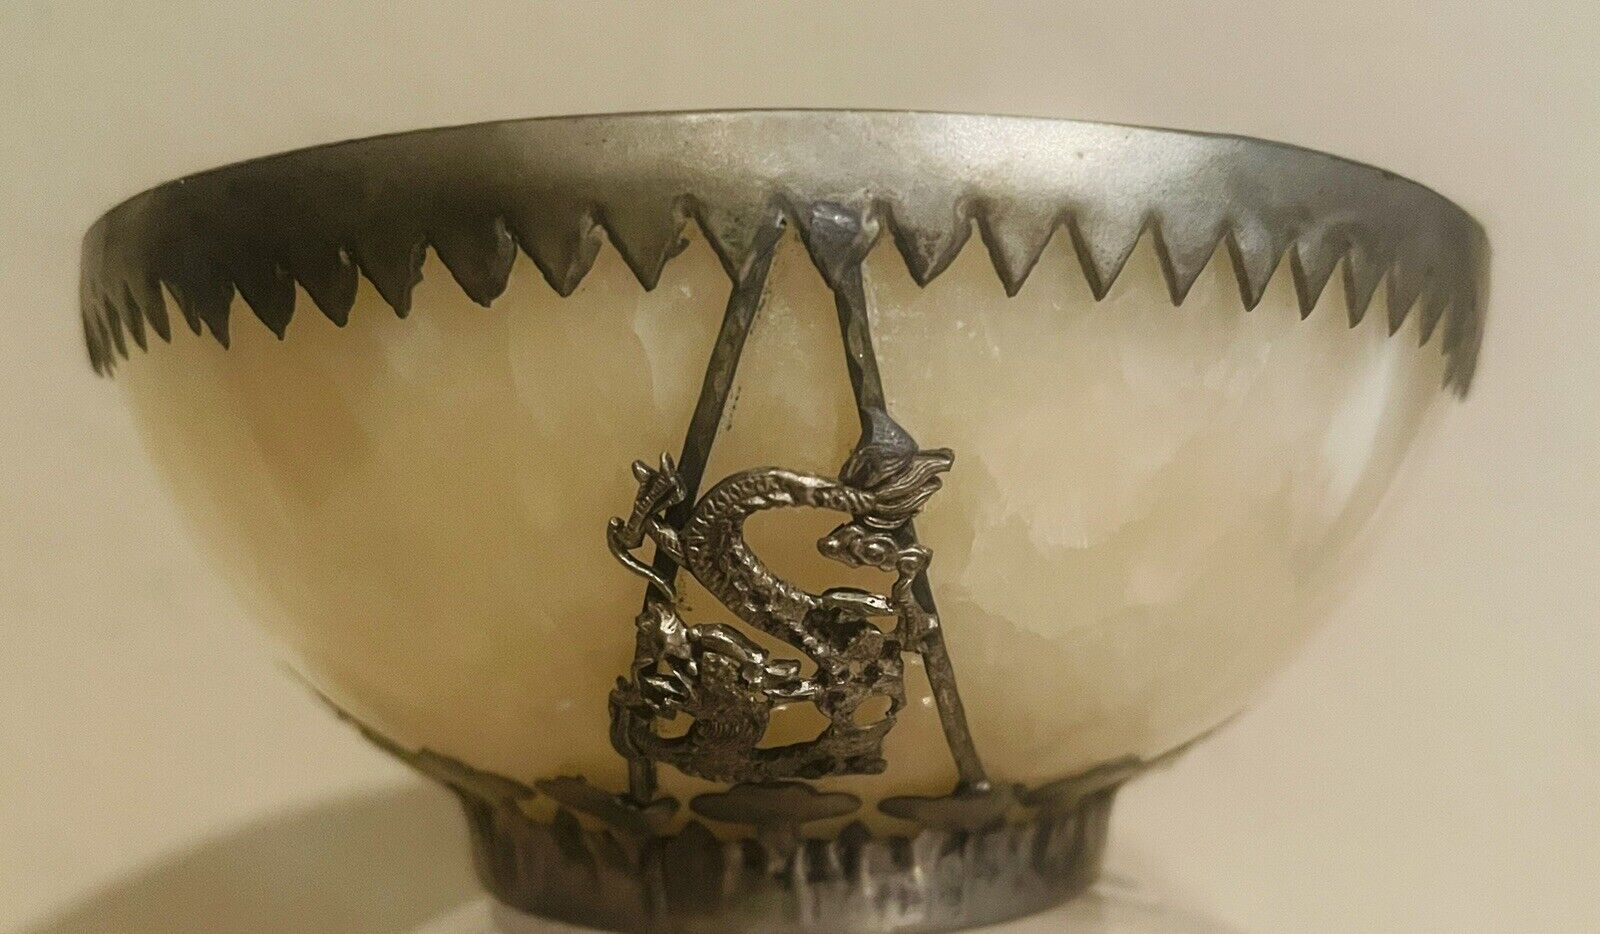 Vintage Chinese Stone Bowl With  Metal Dragon Accents